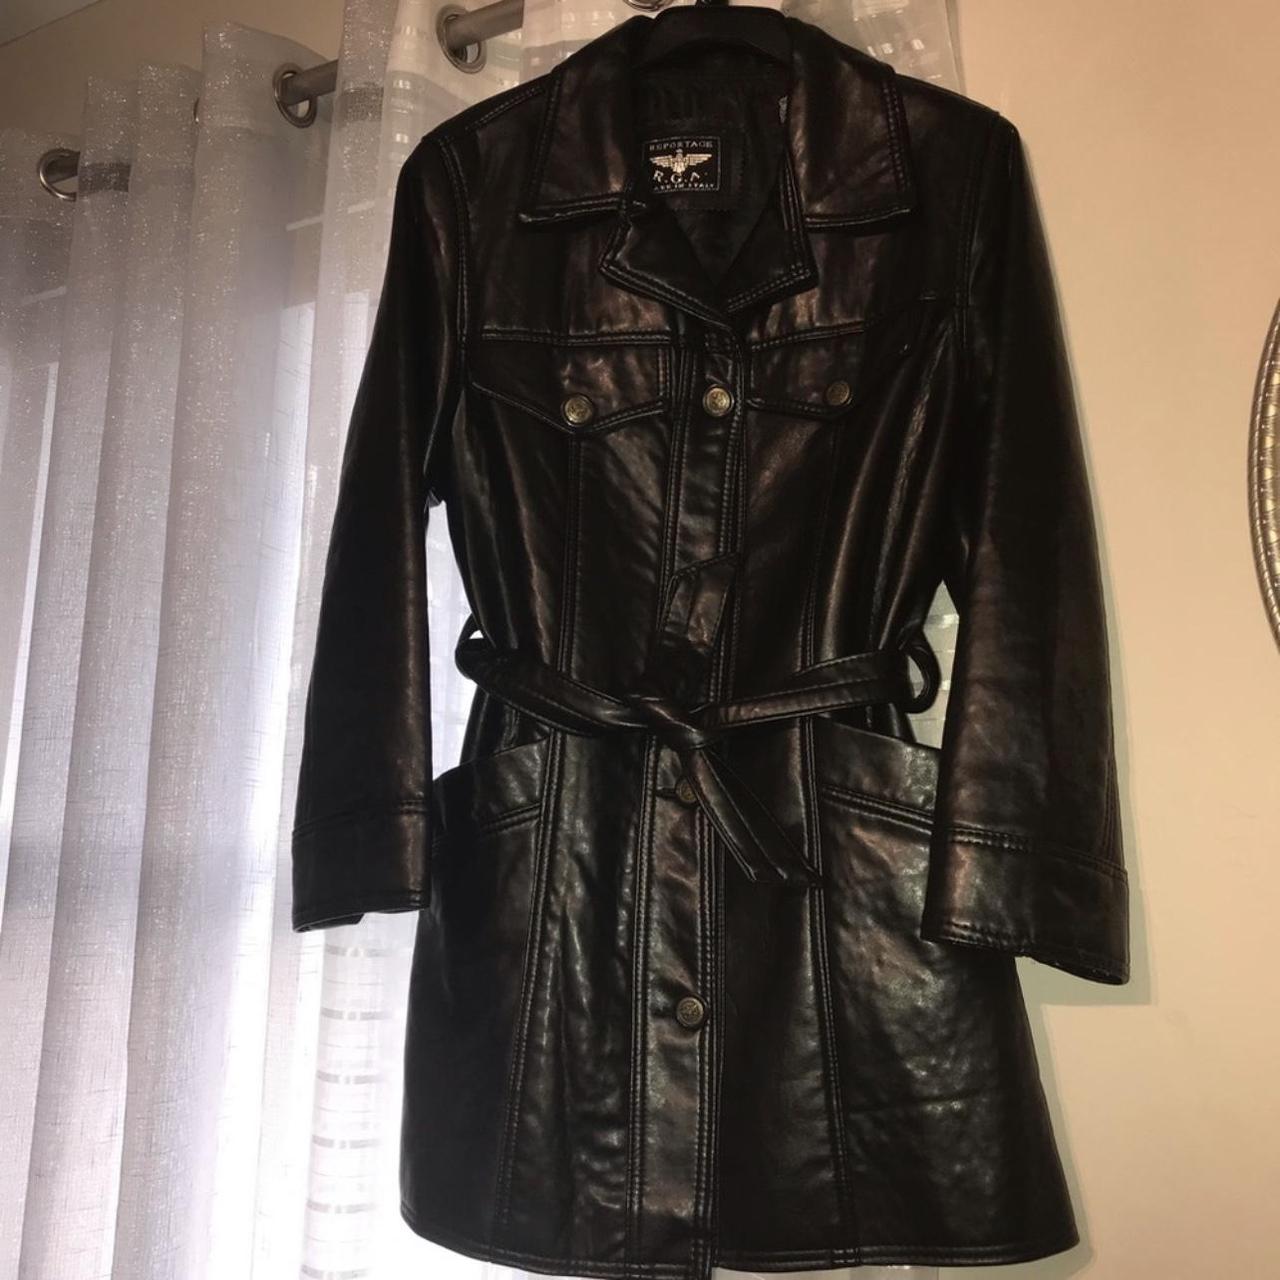 reportage R.G.A. leather jacket from Italy. One of... - Depop